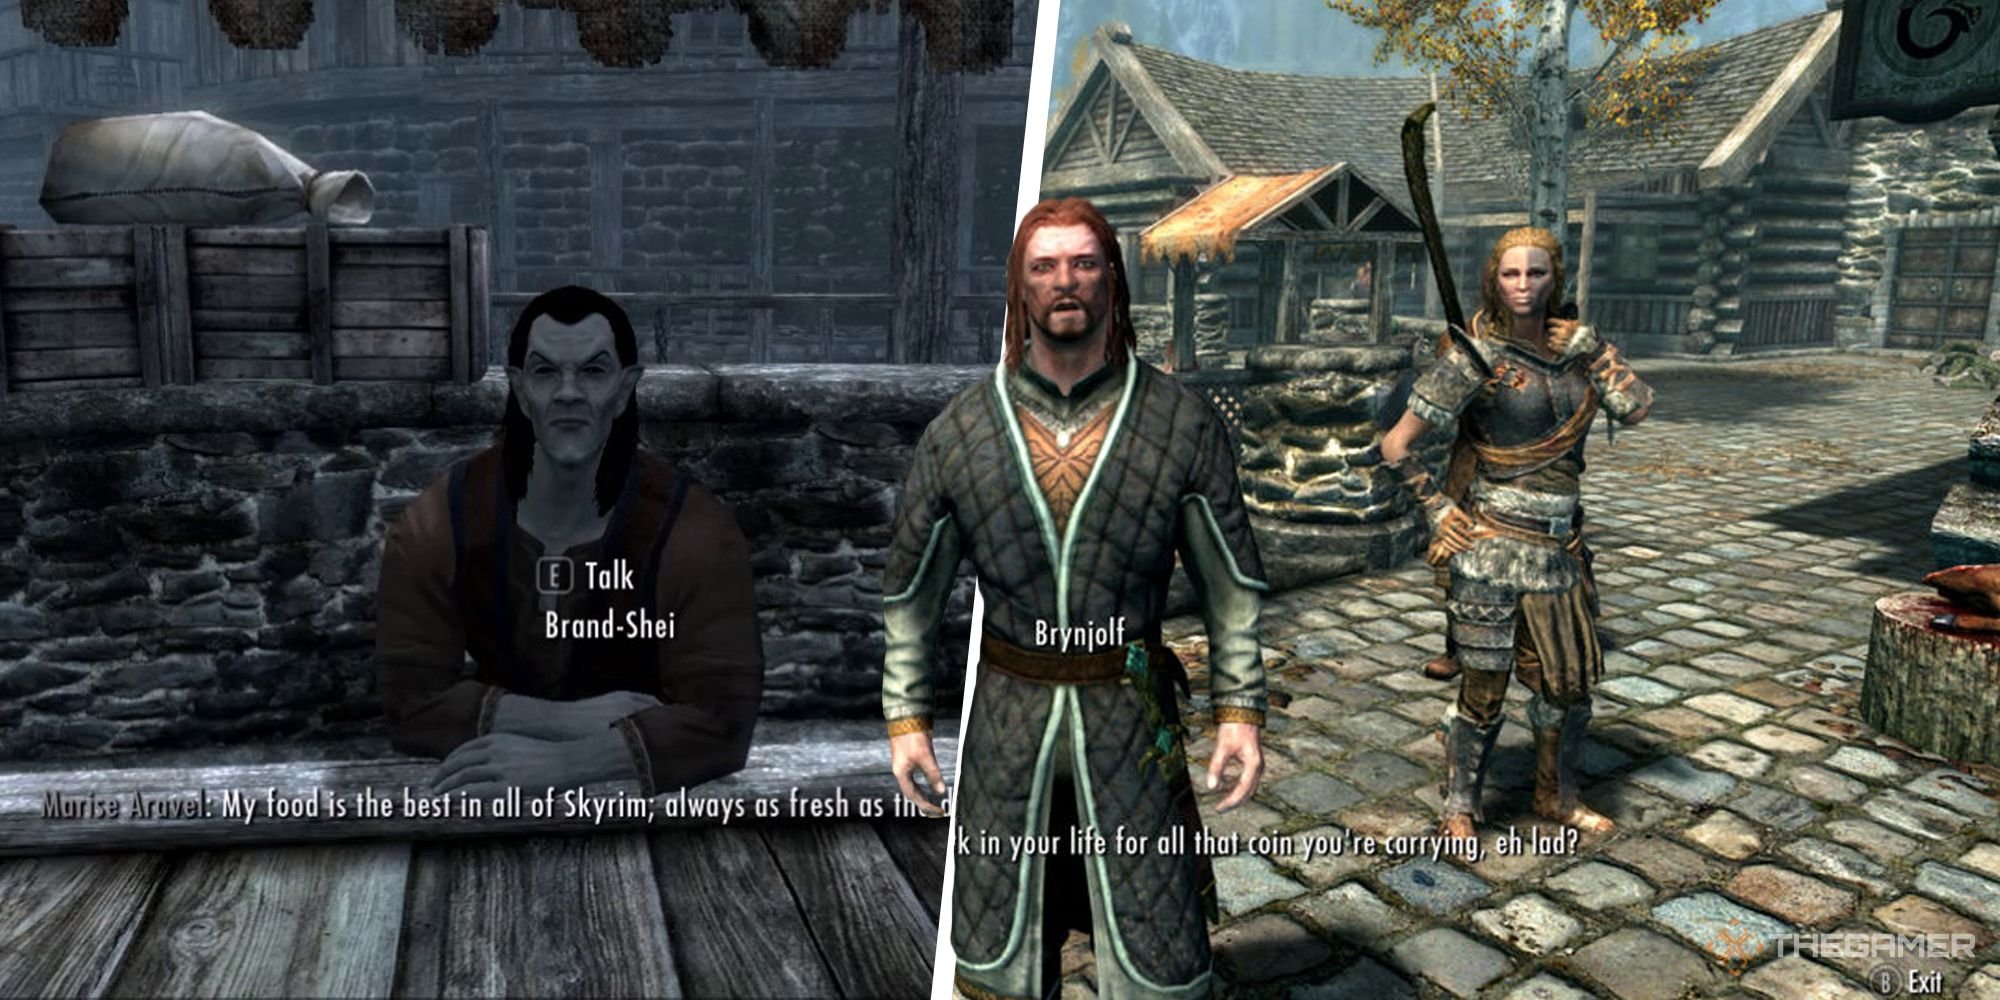 Skyrim: How To Keep Brand-Shei Out Of Jail